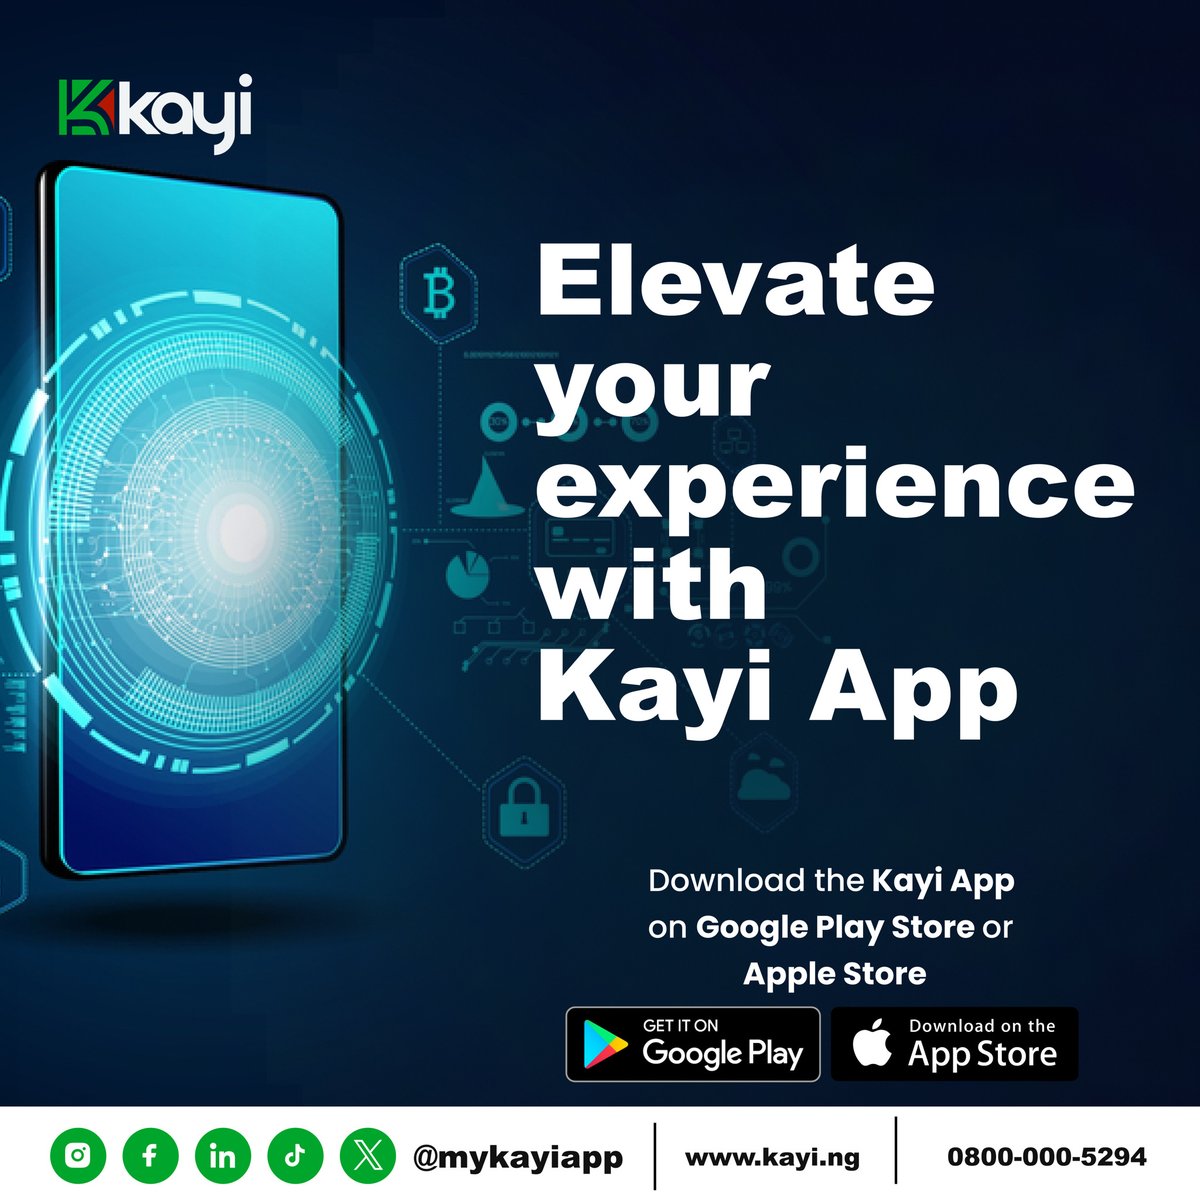 Experience the power of AI-driven banking. Download MyKayiApp now on Google Store or Apple Store and redefine your financial journey. 

#MyKayiApp #NowLive #Kayiway #DownloadNow #Bankingwithoutlimits #downloadmykayiapp